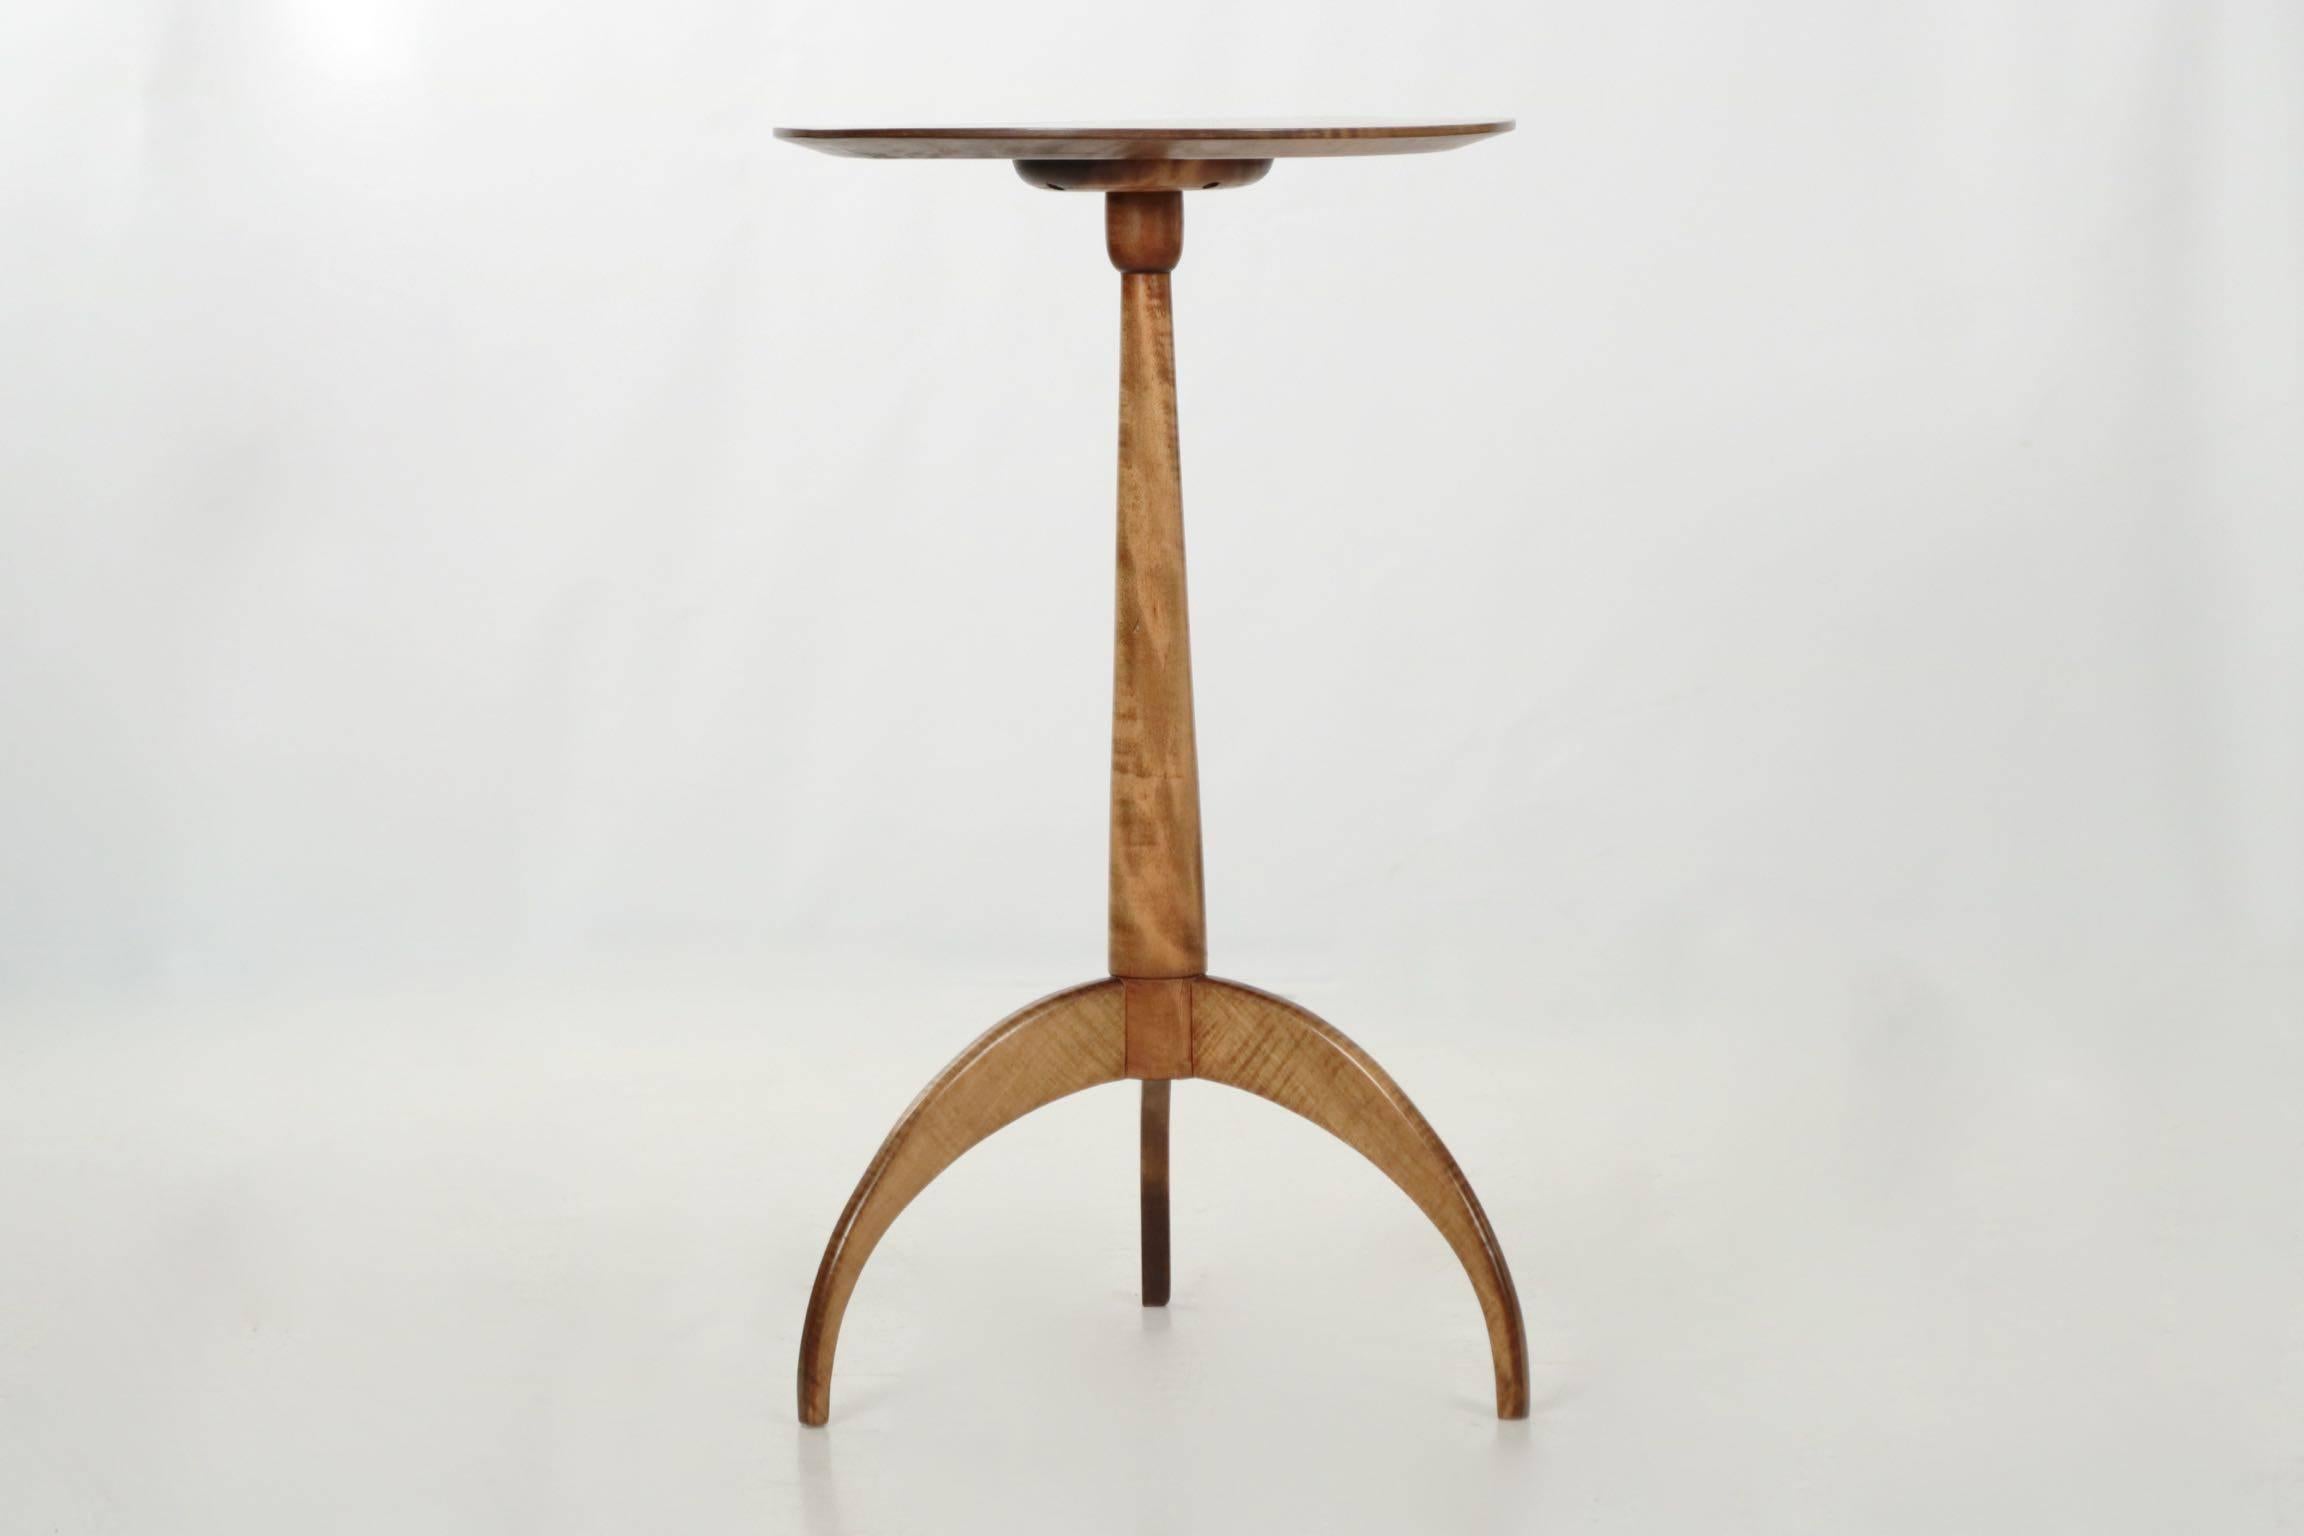 20th Century American Shaker Style Cherry Candlestand Side Table by Jack McGuire, circa 1992